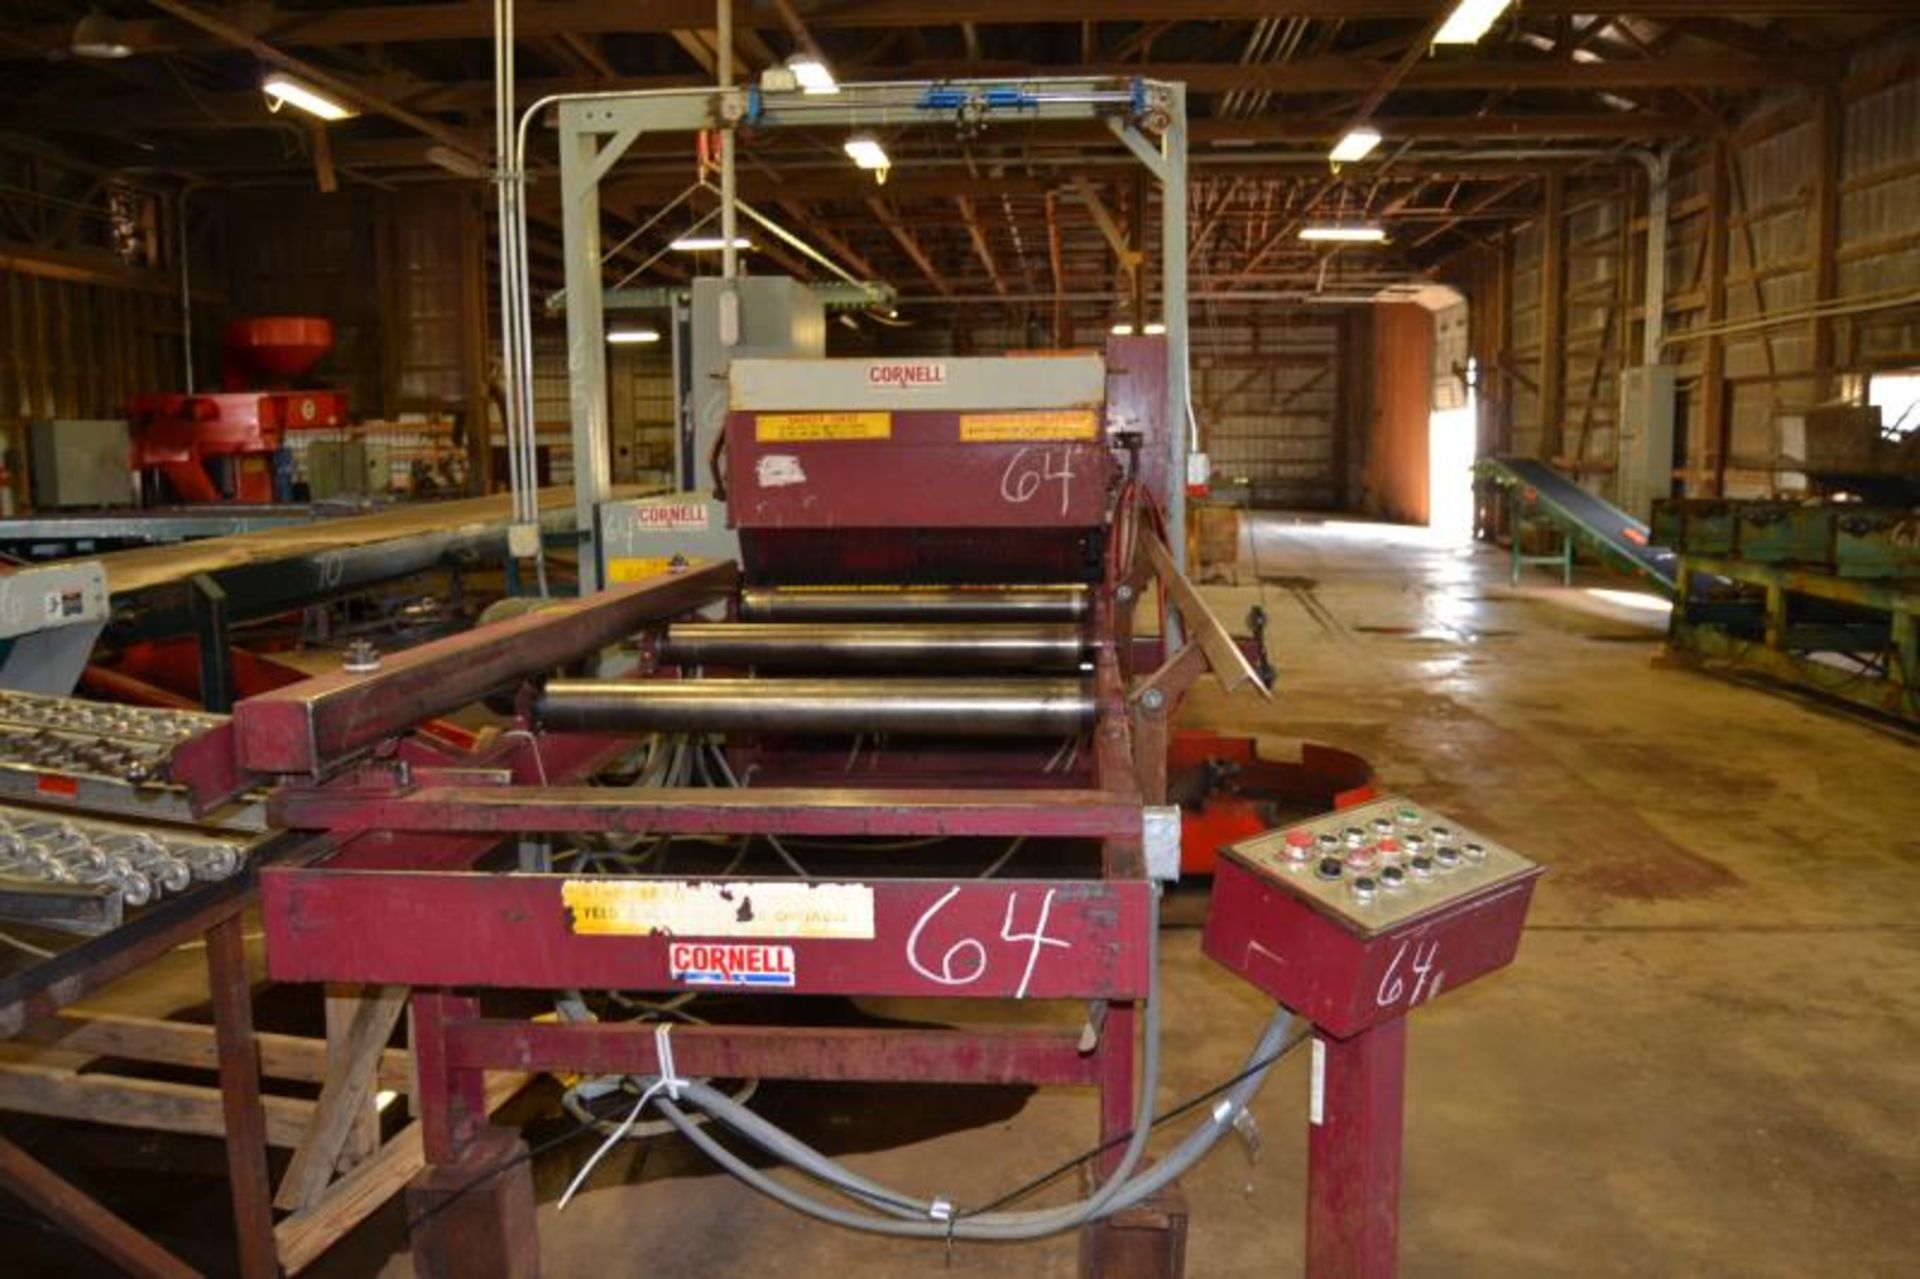 CORNELL 642 4 SAW EDGER W/ 2 MOVEABLE SAWS W/ ELECTRIC SETWORKS W/ INFEED ROLLCASE W/ FENCE W/ - Image 3 of 5